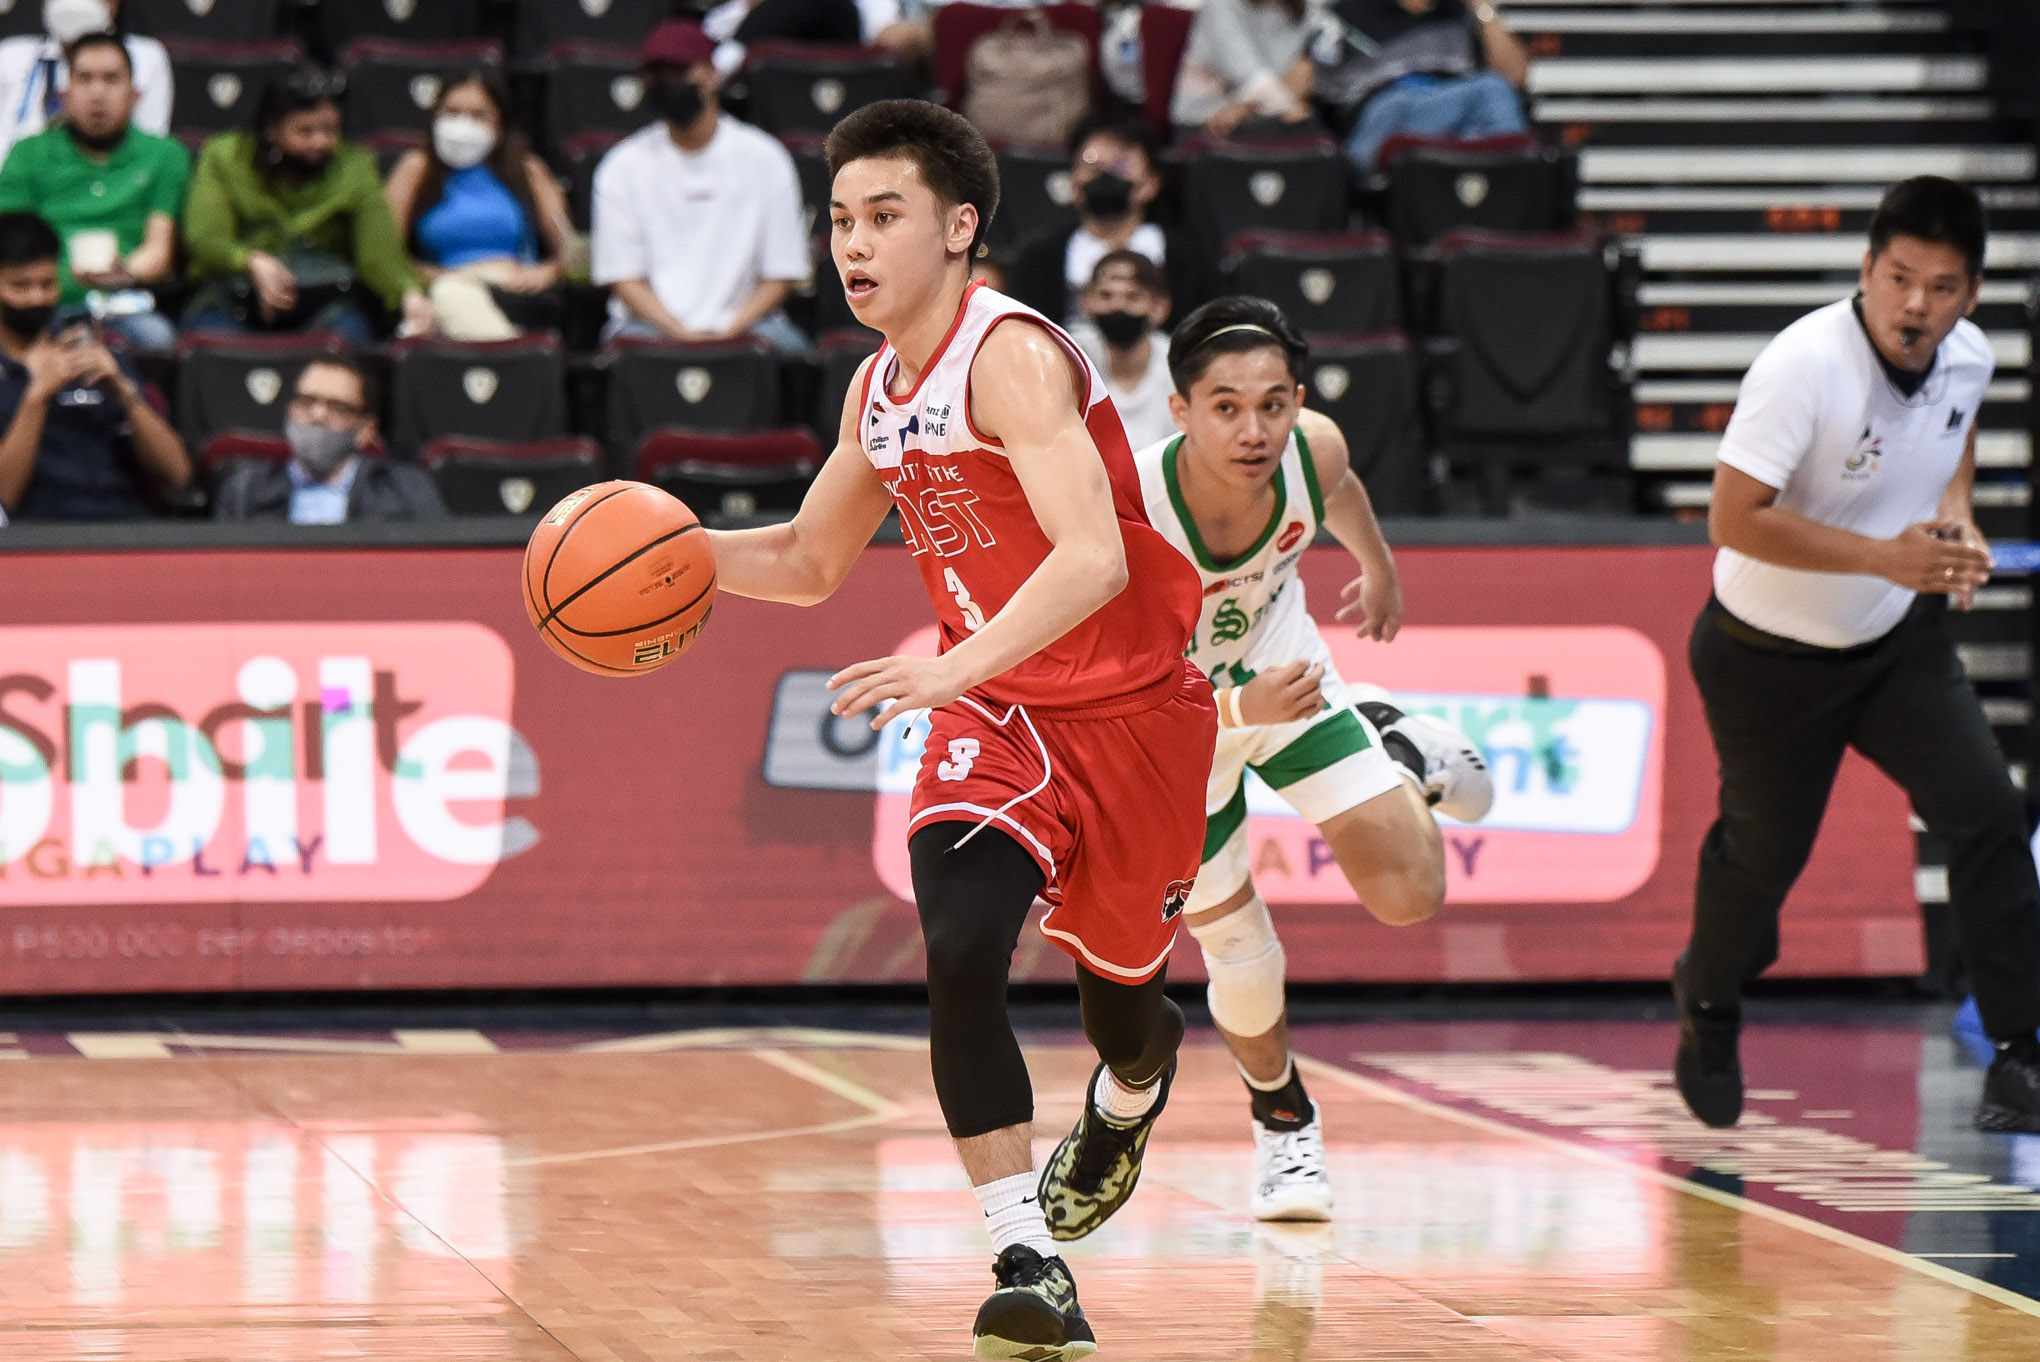 UE guard Kyle Paranda leads the Red Warriors to latest UAAP win.